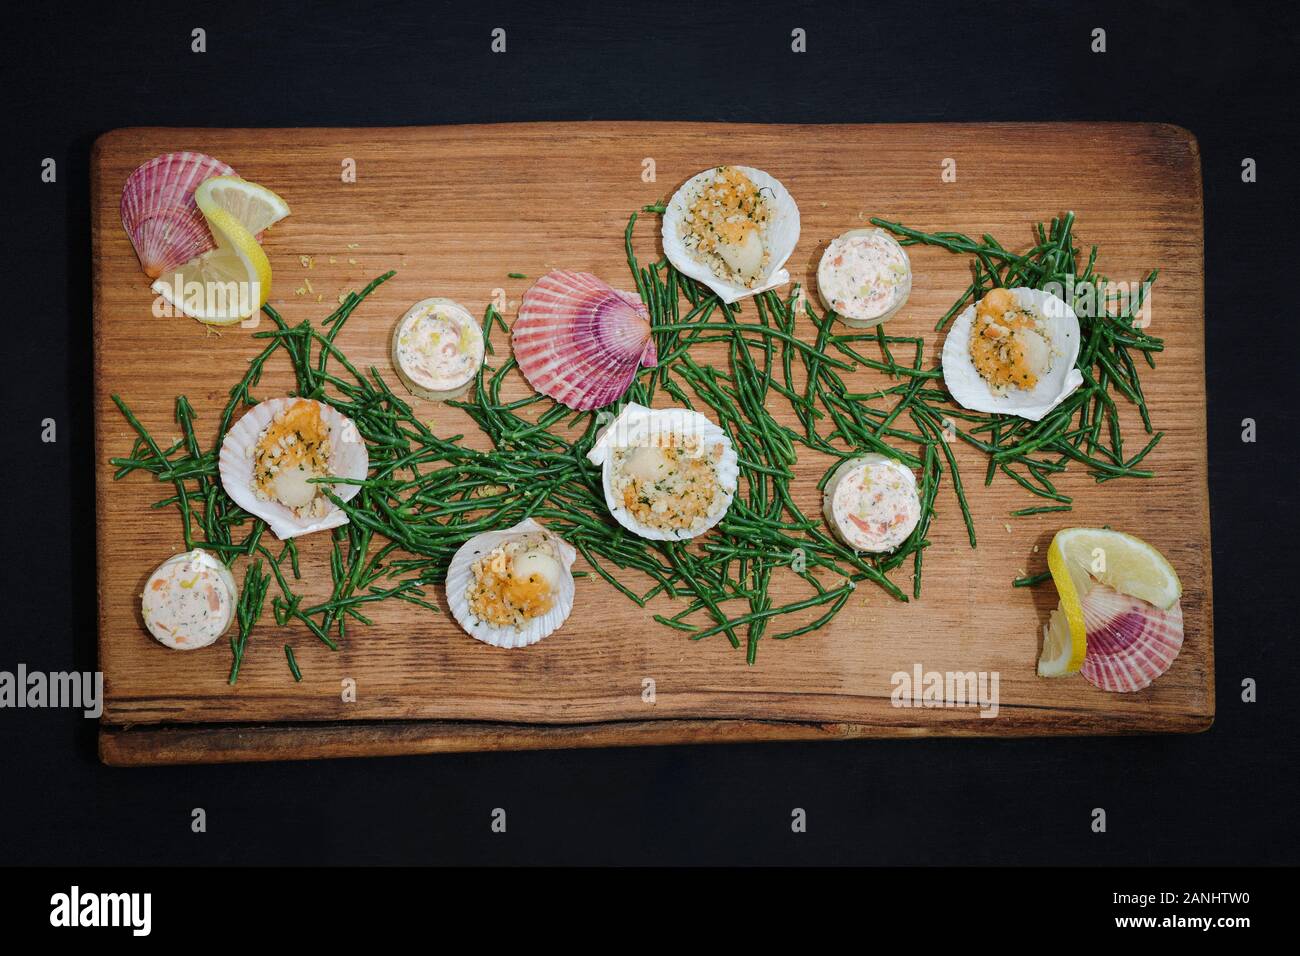 Seafood platter: Canapes served on a wooden board with scallops and samphire and lemon wedges. Top view. Stock Photo